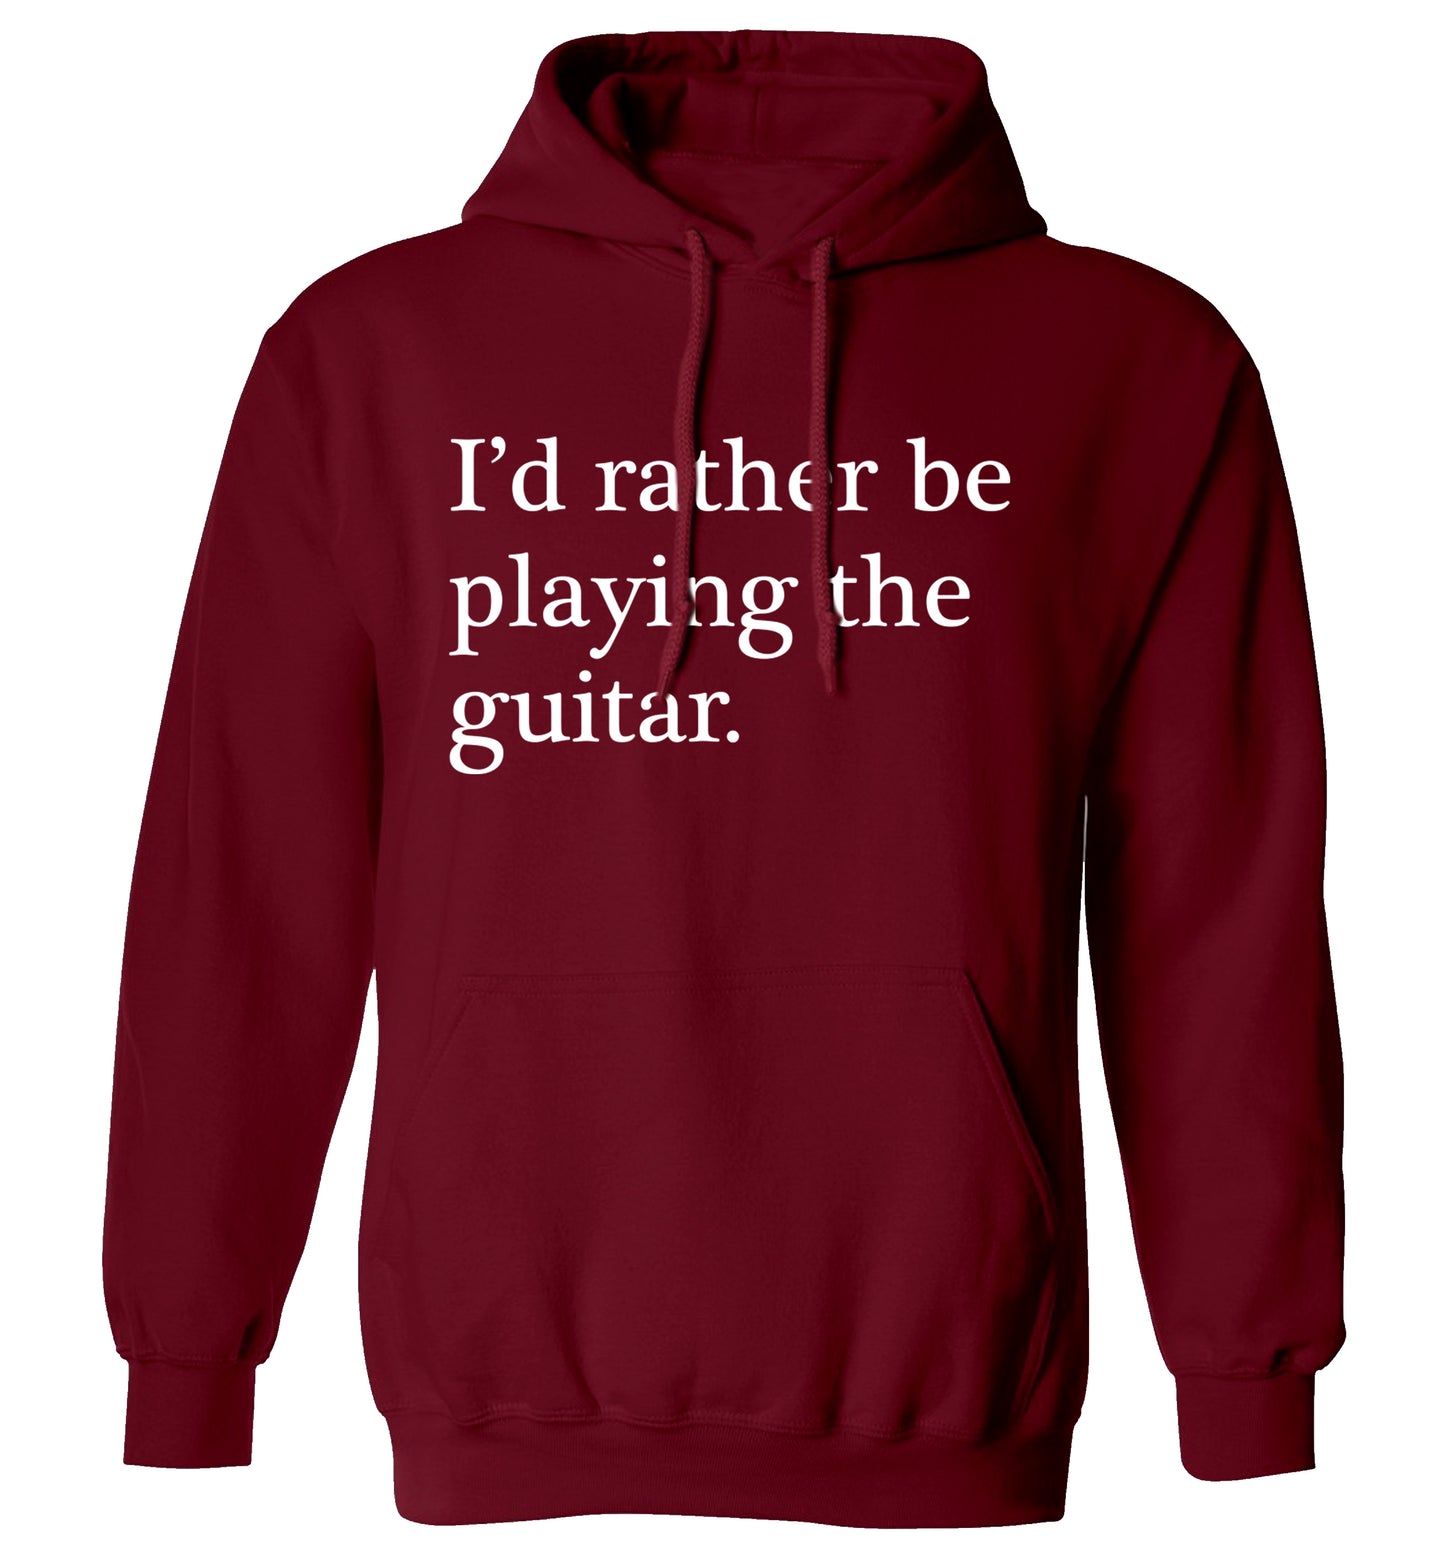 I'd rather be playing the guitar adults unisex maroon hoodie 2XL